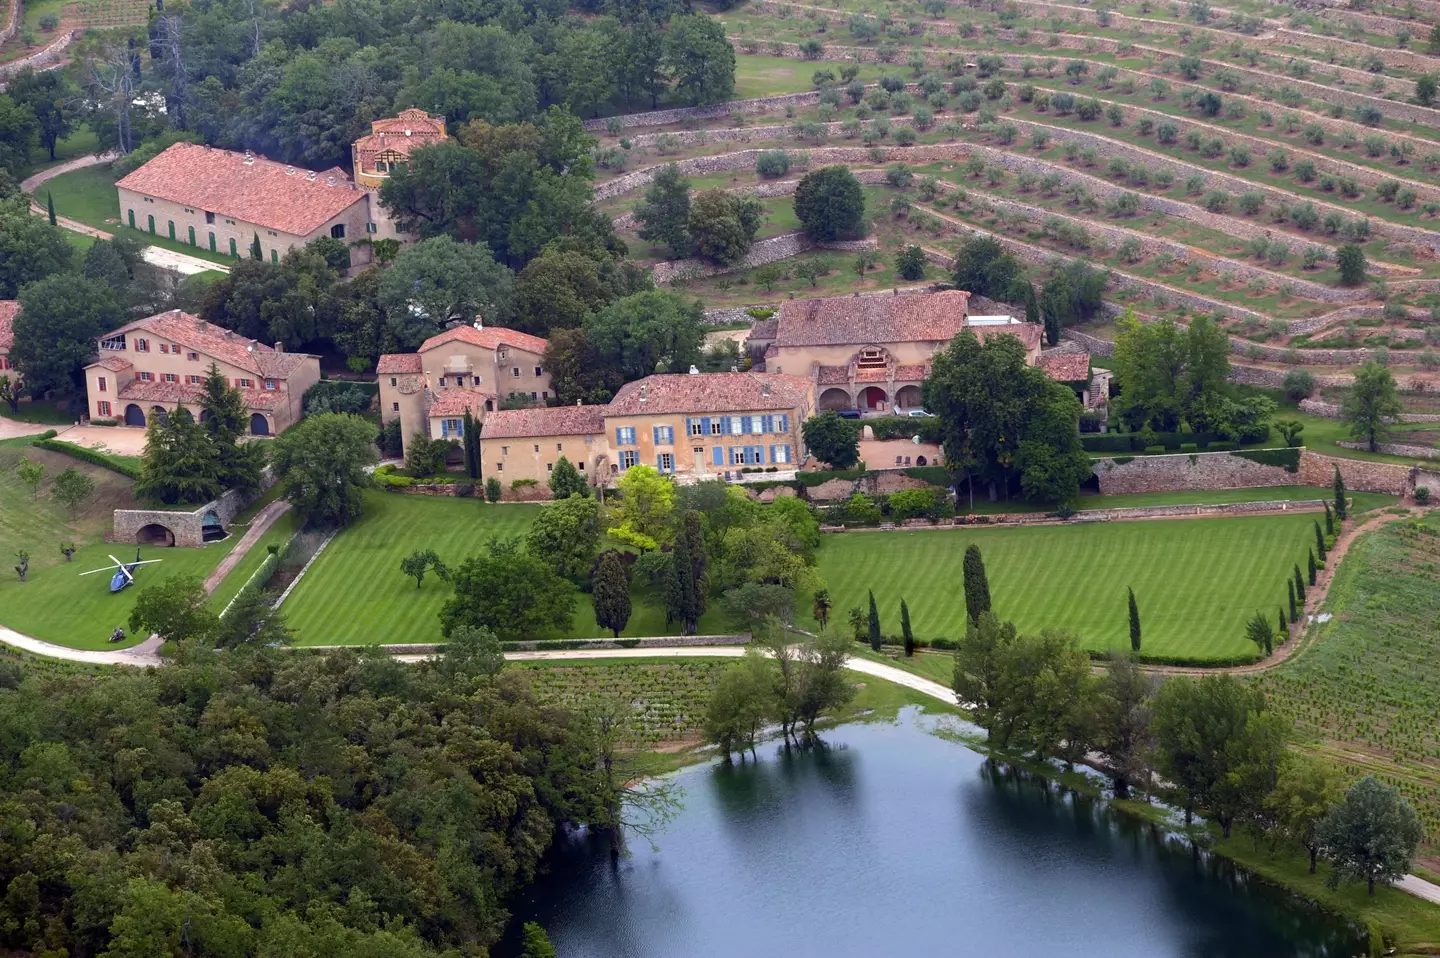 The legal proceedings began over the former couple's winery in France.